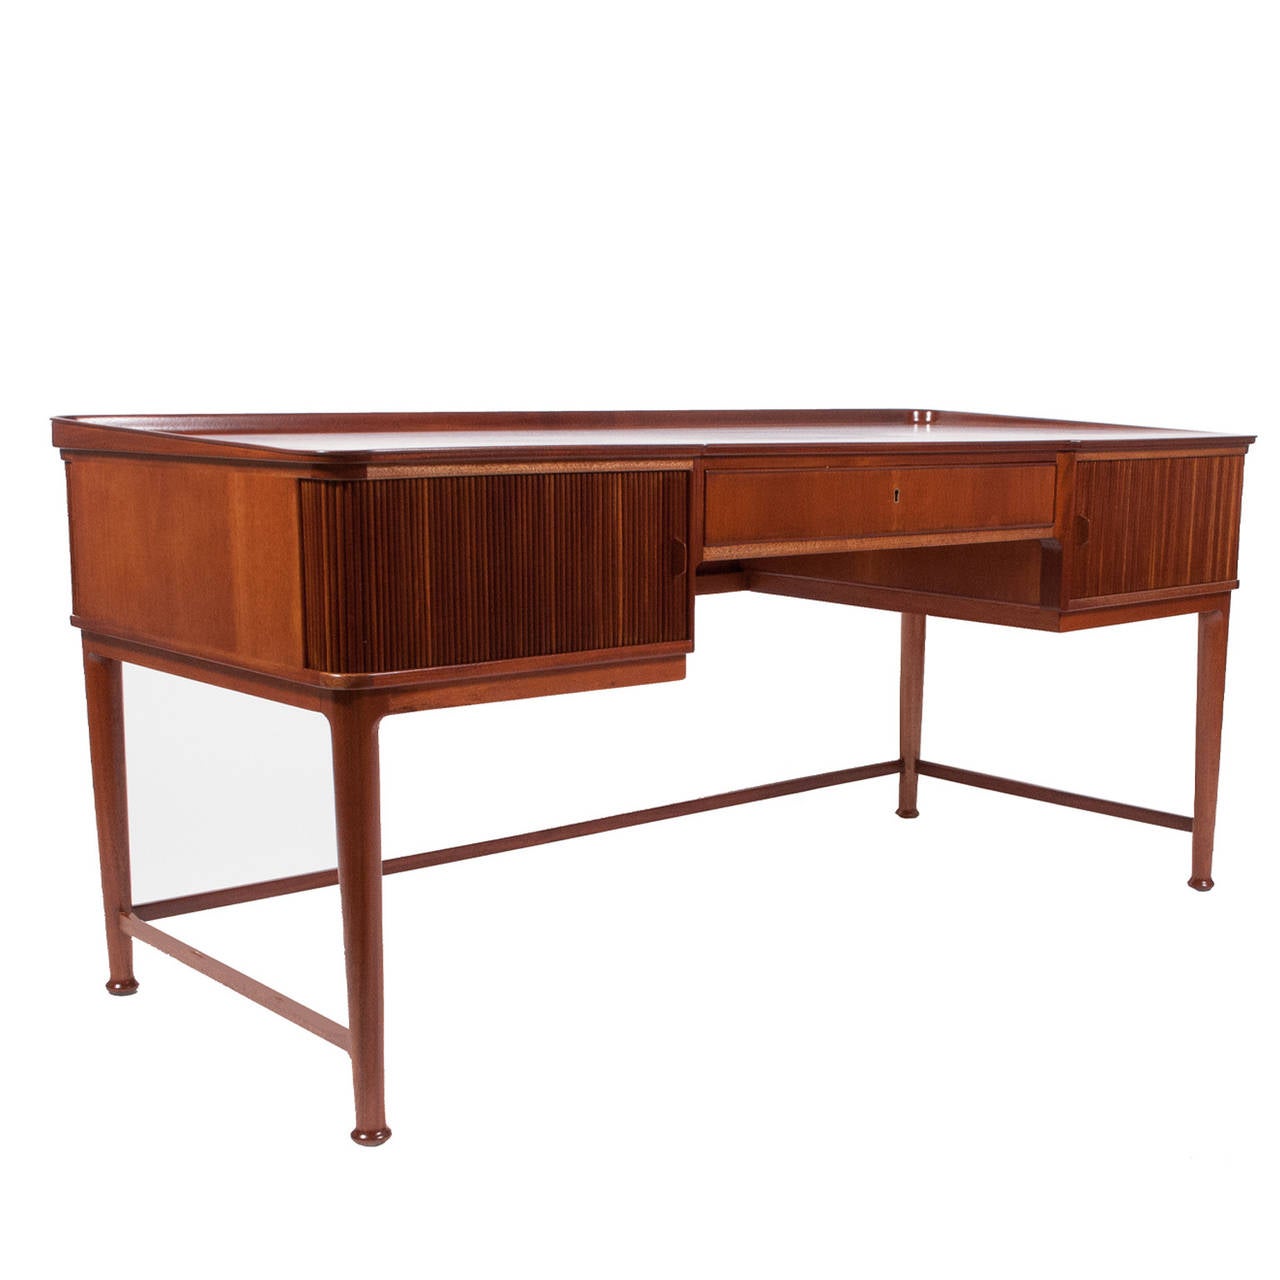 Beautiful mahogany desk with birch interior; tambour doors on each side revealing two drawers each. Top with lip; back of desk also with tambour doors revealing shelves. Solid mahogany legs and stretchers. Made for Svenskt Tenn.